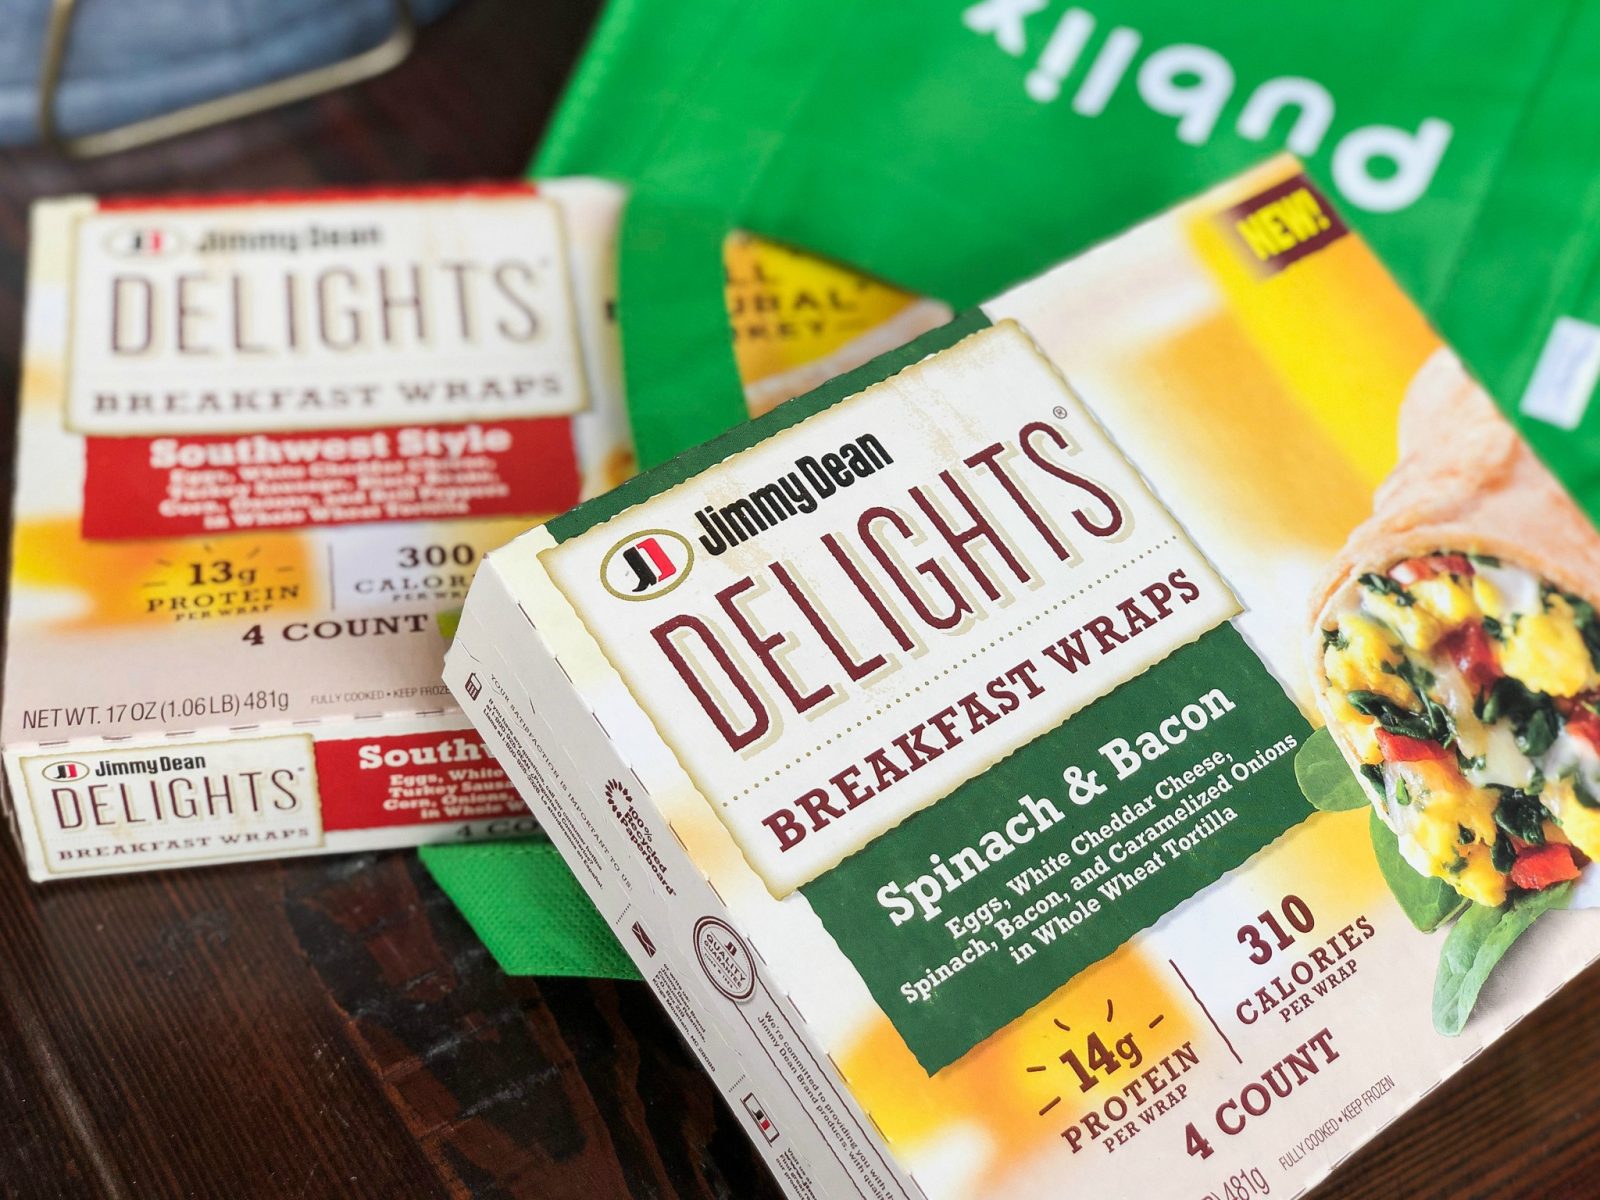 Grab Savings On Delicious New Jimmy Dean Delights® Breakfast Wraps With The Digital Coupon